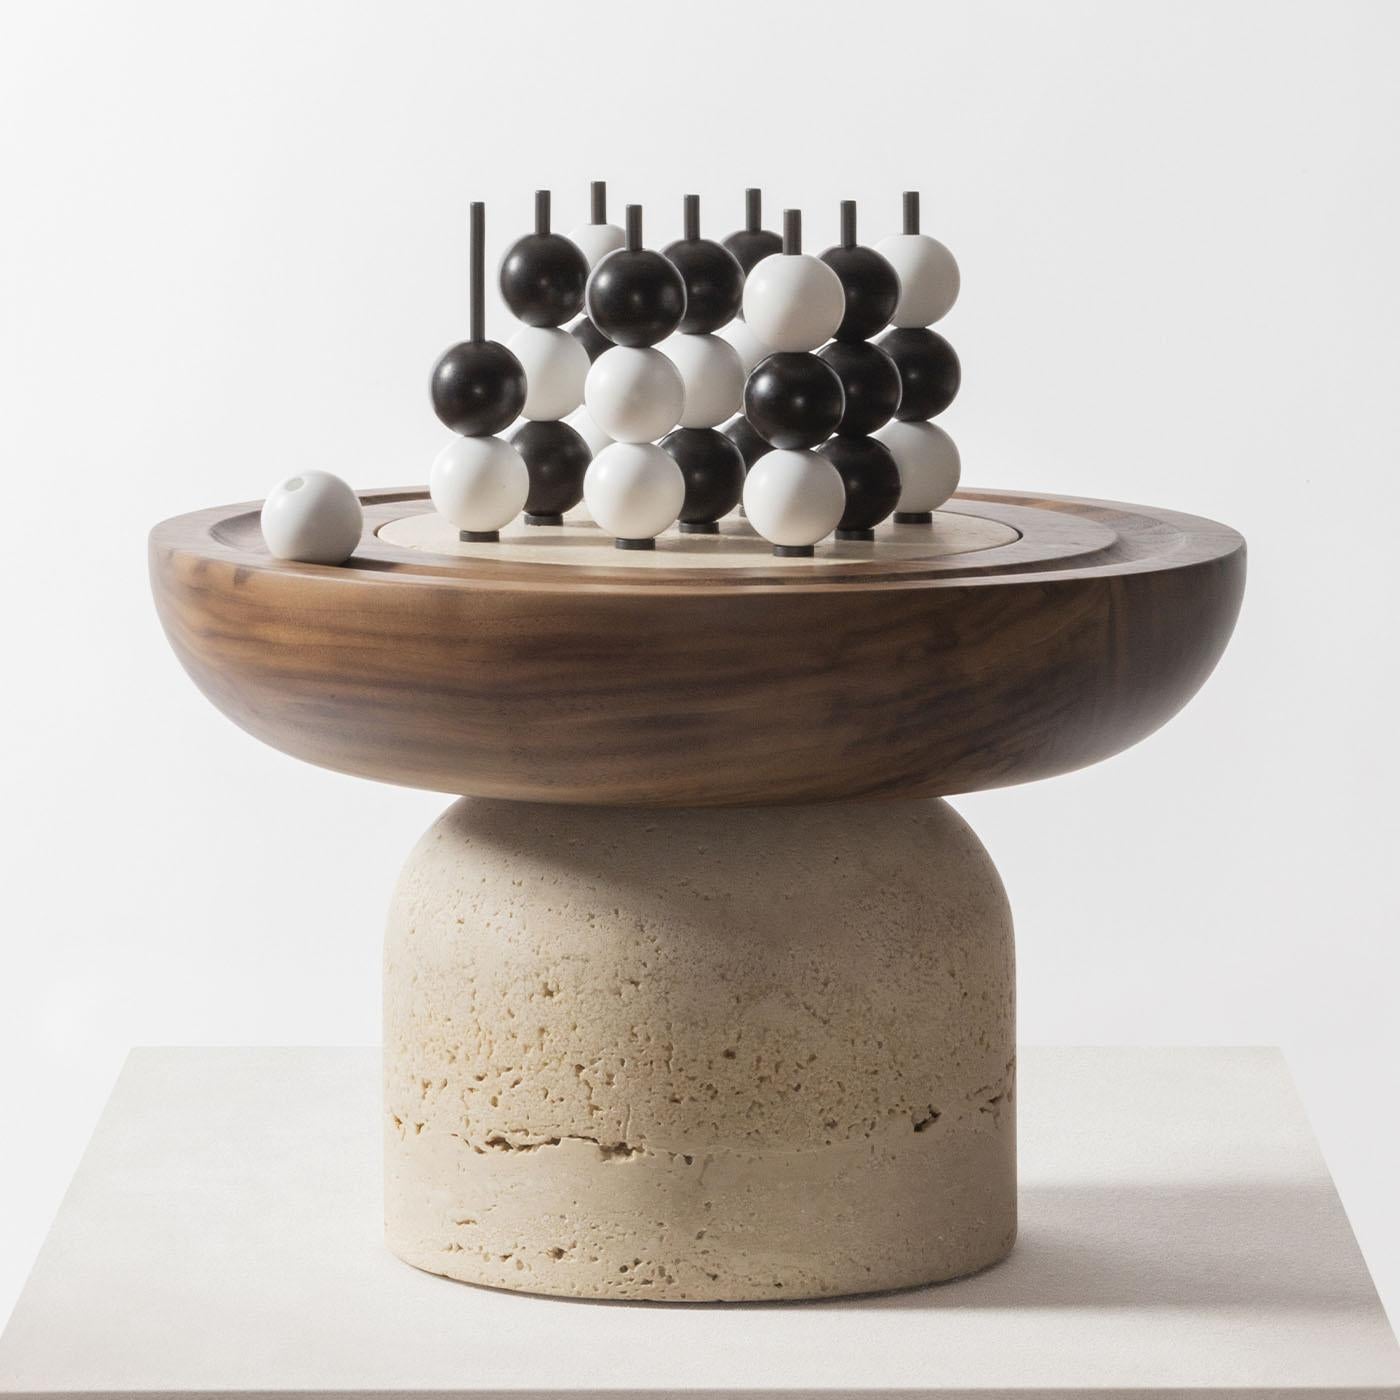 Large volumes in wood and stone are carved and sculpted to create playing fields with modeled, almost primitive lines, with a solid walnut top on a travertine base, designed by Simone Facciullacci. Bakelite black and white beads and burnished